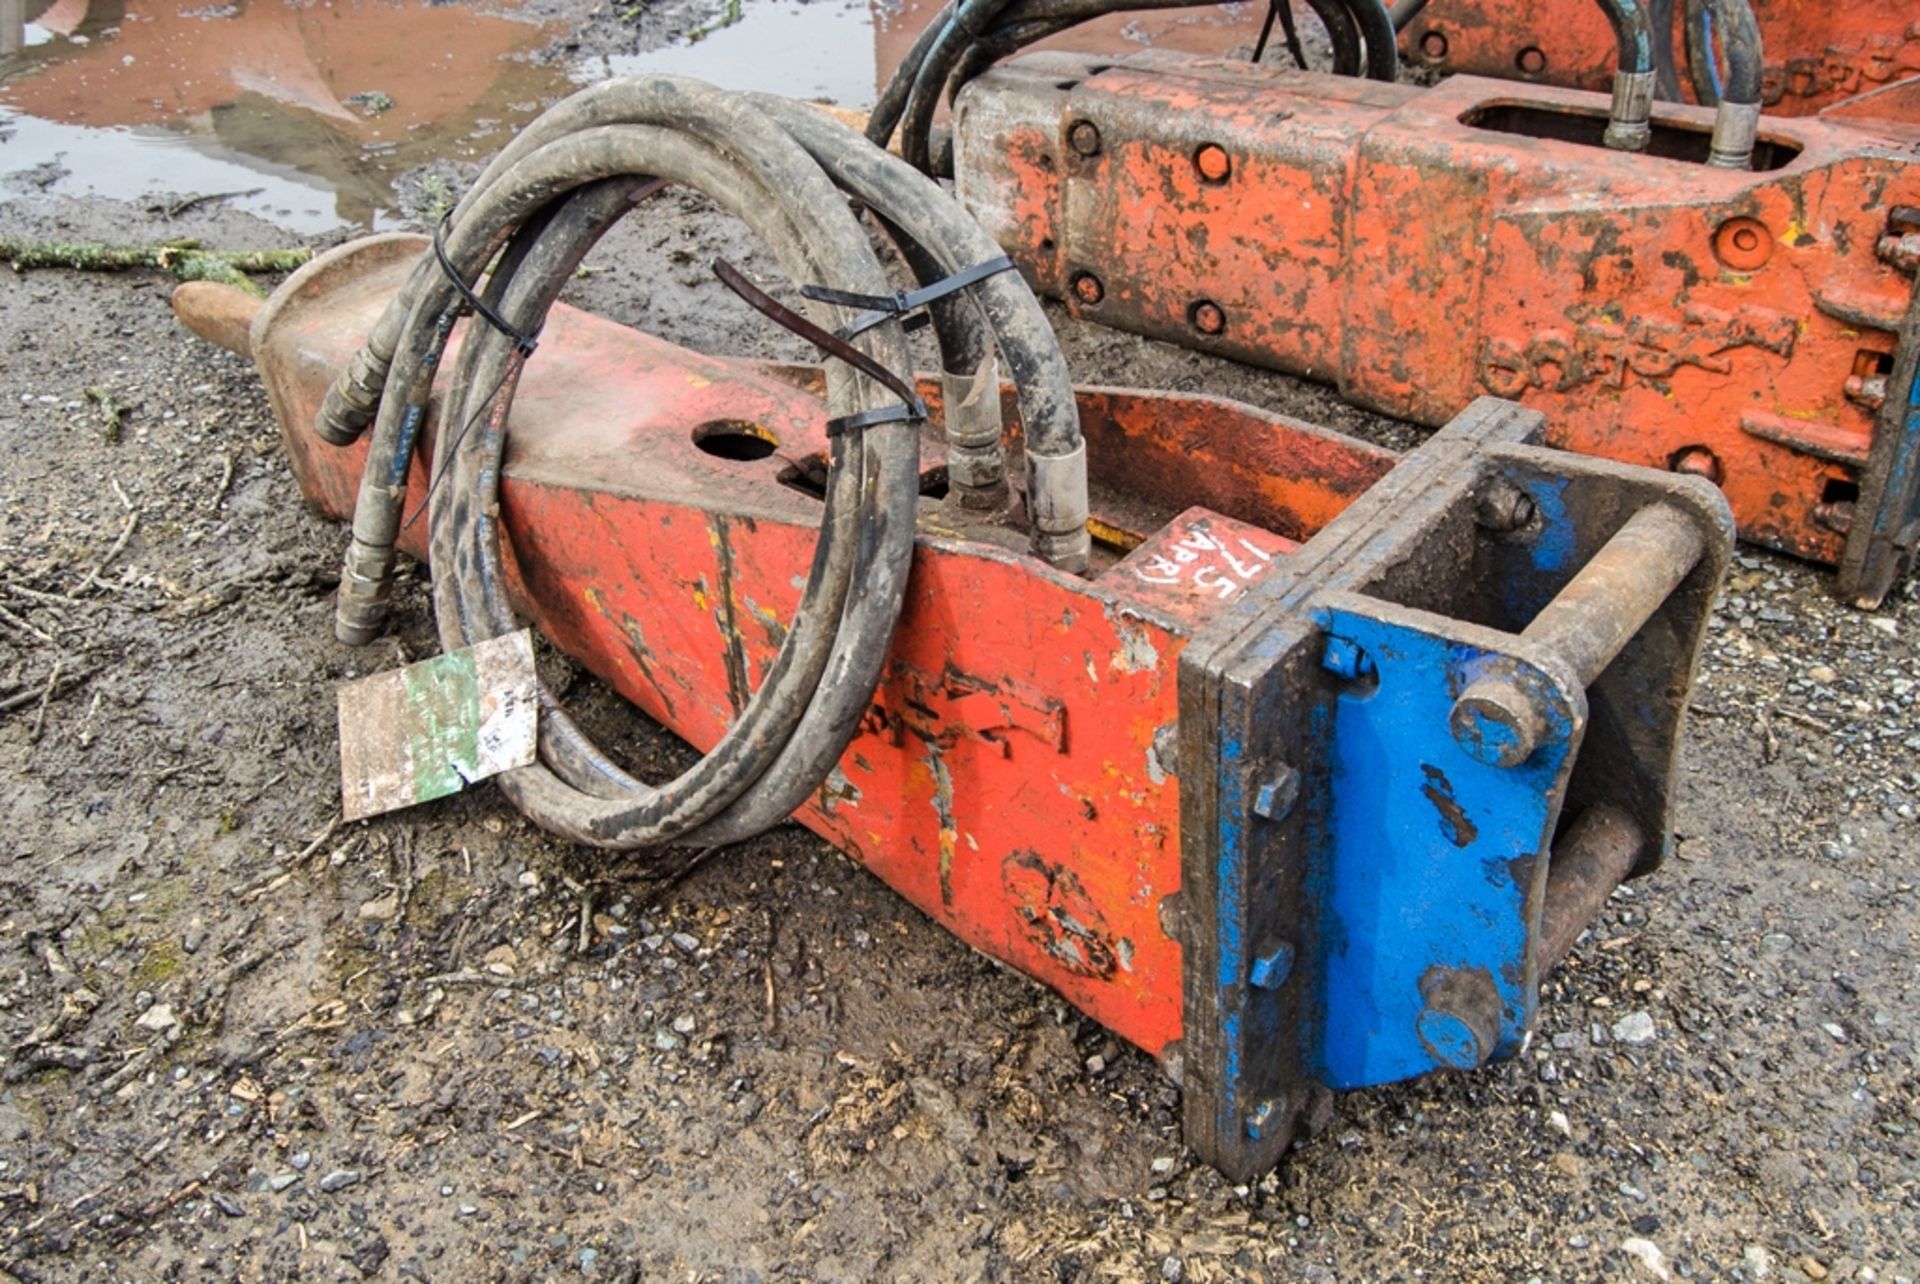 Indeco hydraulic breaker to suit excavator Pin diameter: 35mm Pin centres: 190mm Pin width: 140mm - Image 2 of 4